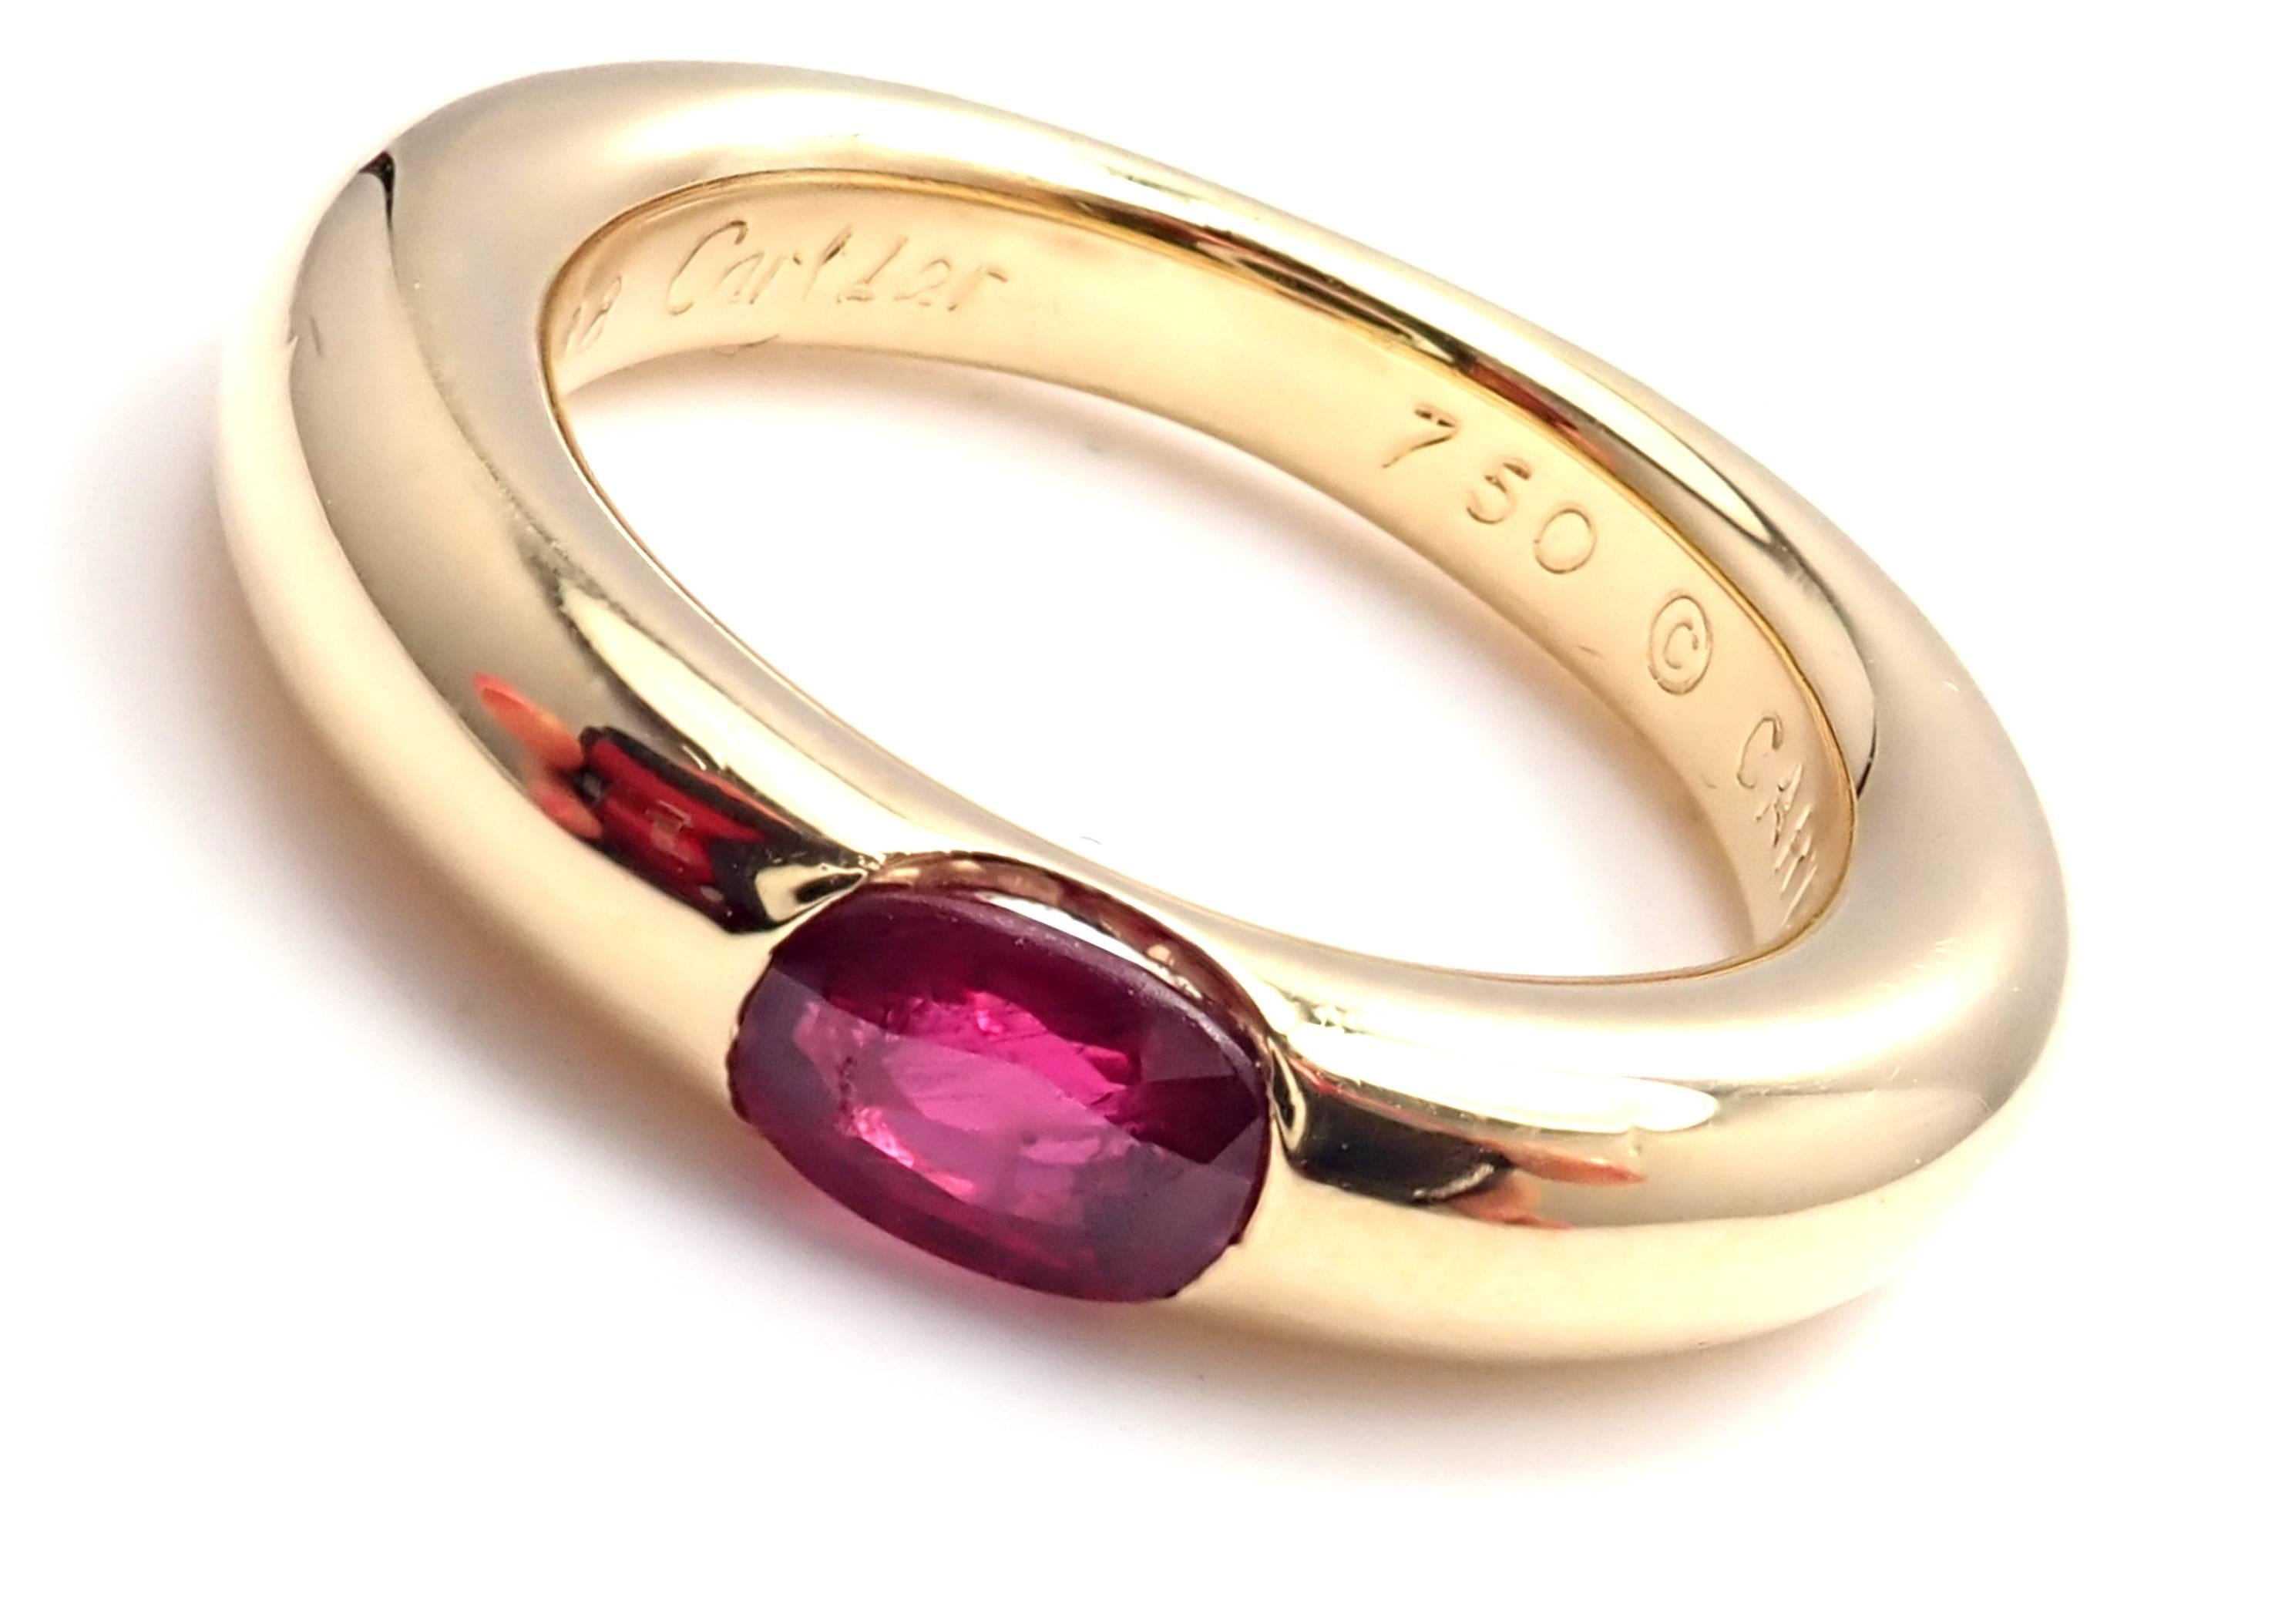 18k Yellow Gold Ellipse Ruby Band Ring by Cartier.
With 1 oval-shaped beautiful ruby 5mm x 4mm.
Details:
Width: 4mm
Weight: 9.2 grams
Ring Size: European 50, US 5 1/4
Stamped Hallmarks: Cartier 750 50 1992 B96438
*Free Shipping within the United